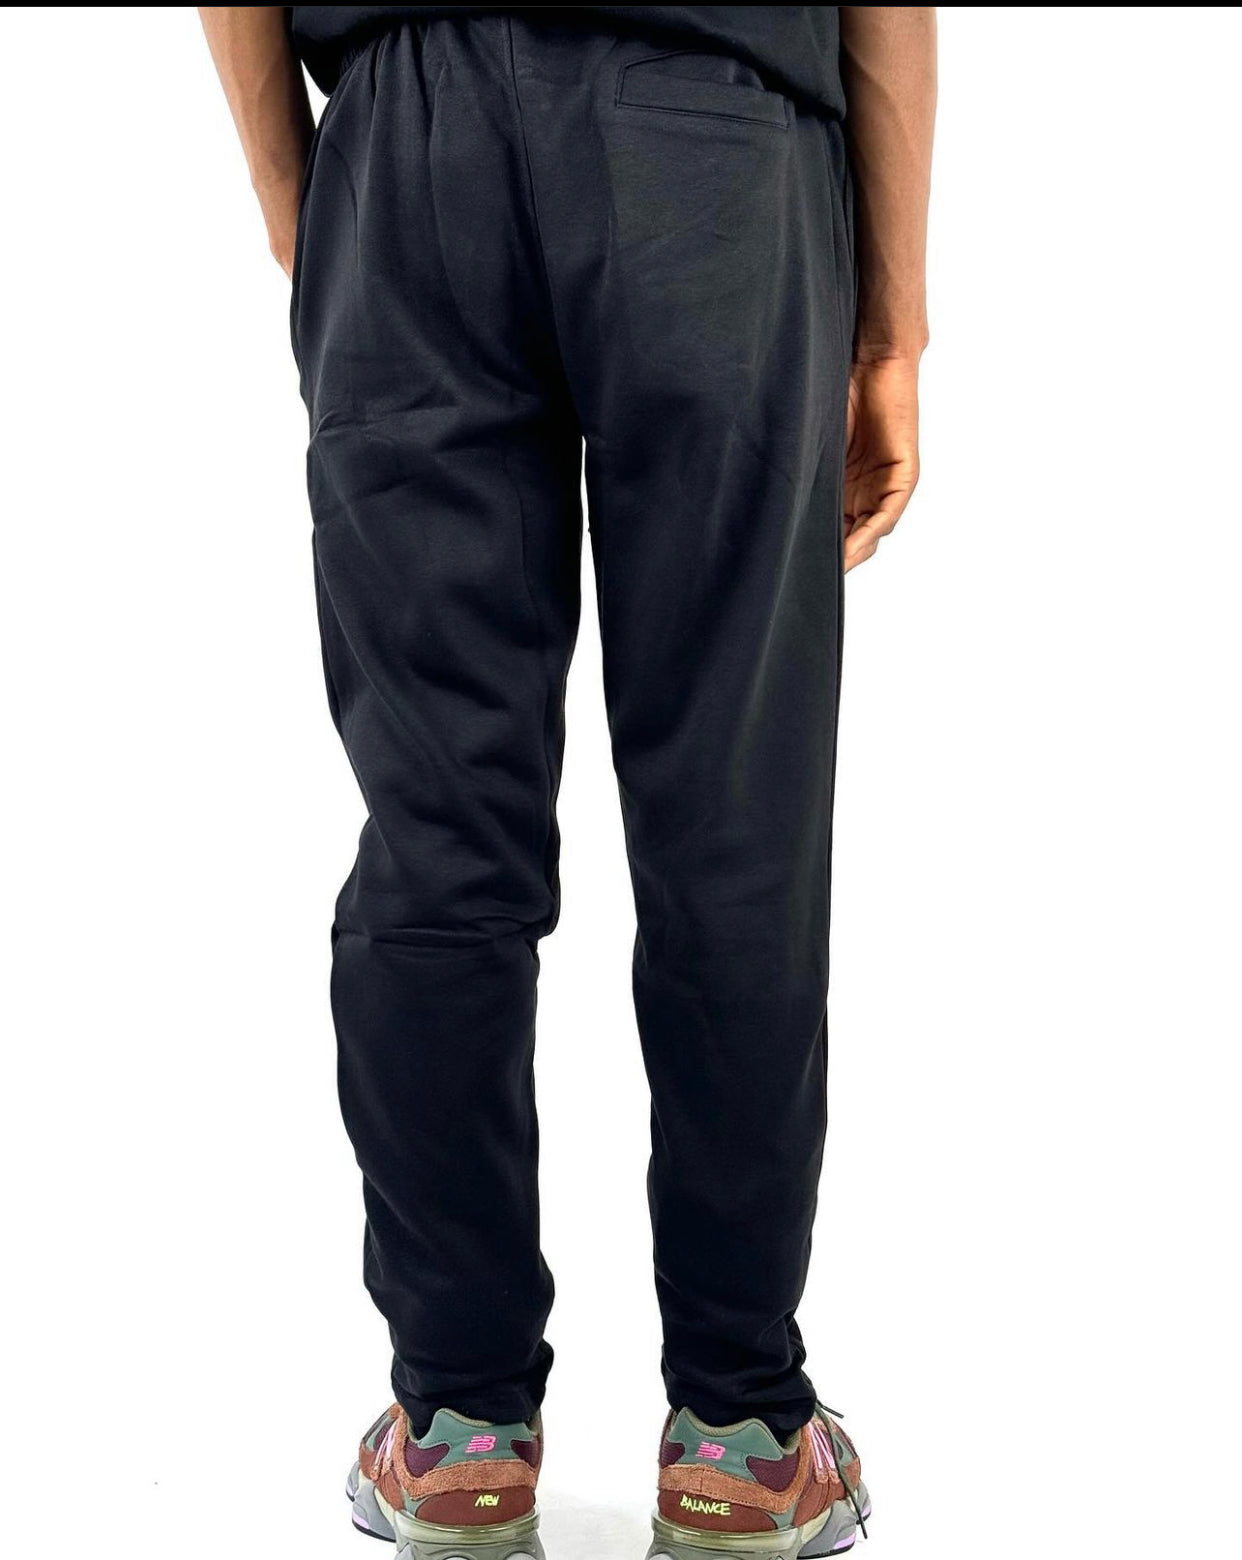 Vol jeans joggers in black